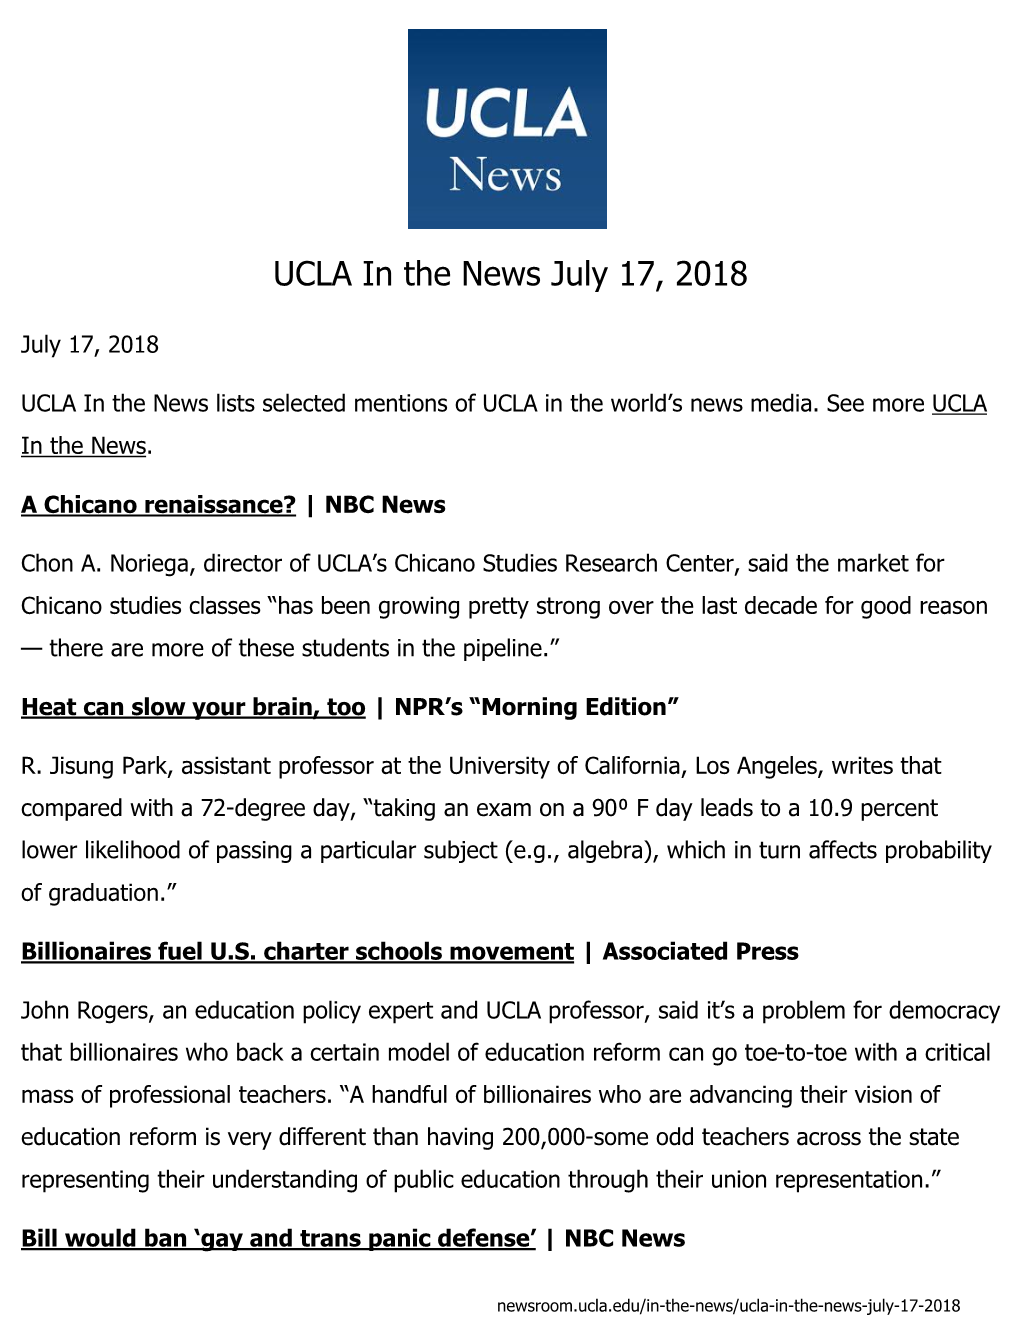 UCLA in the News July 17, 2018